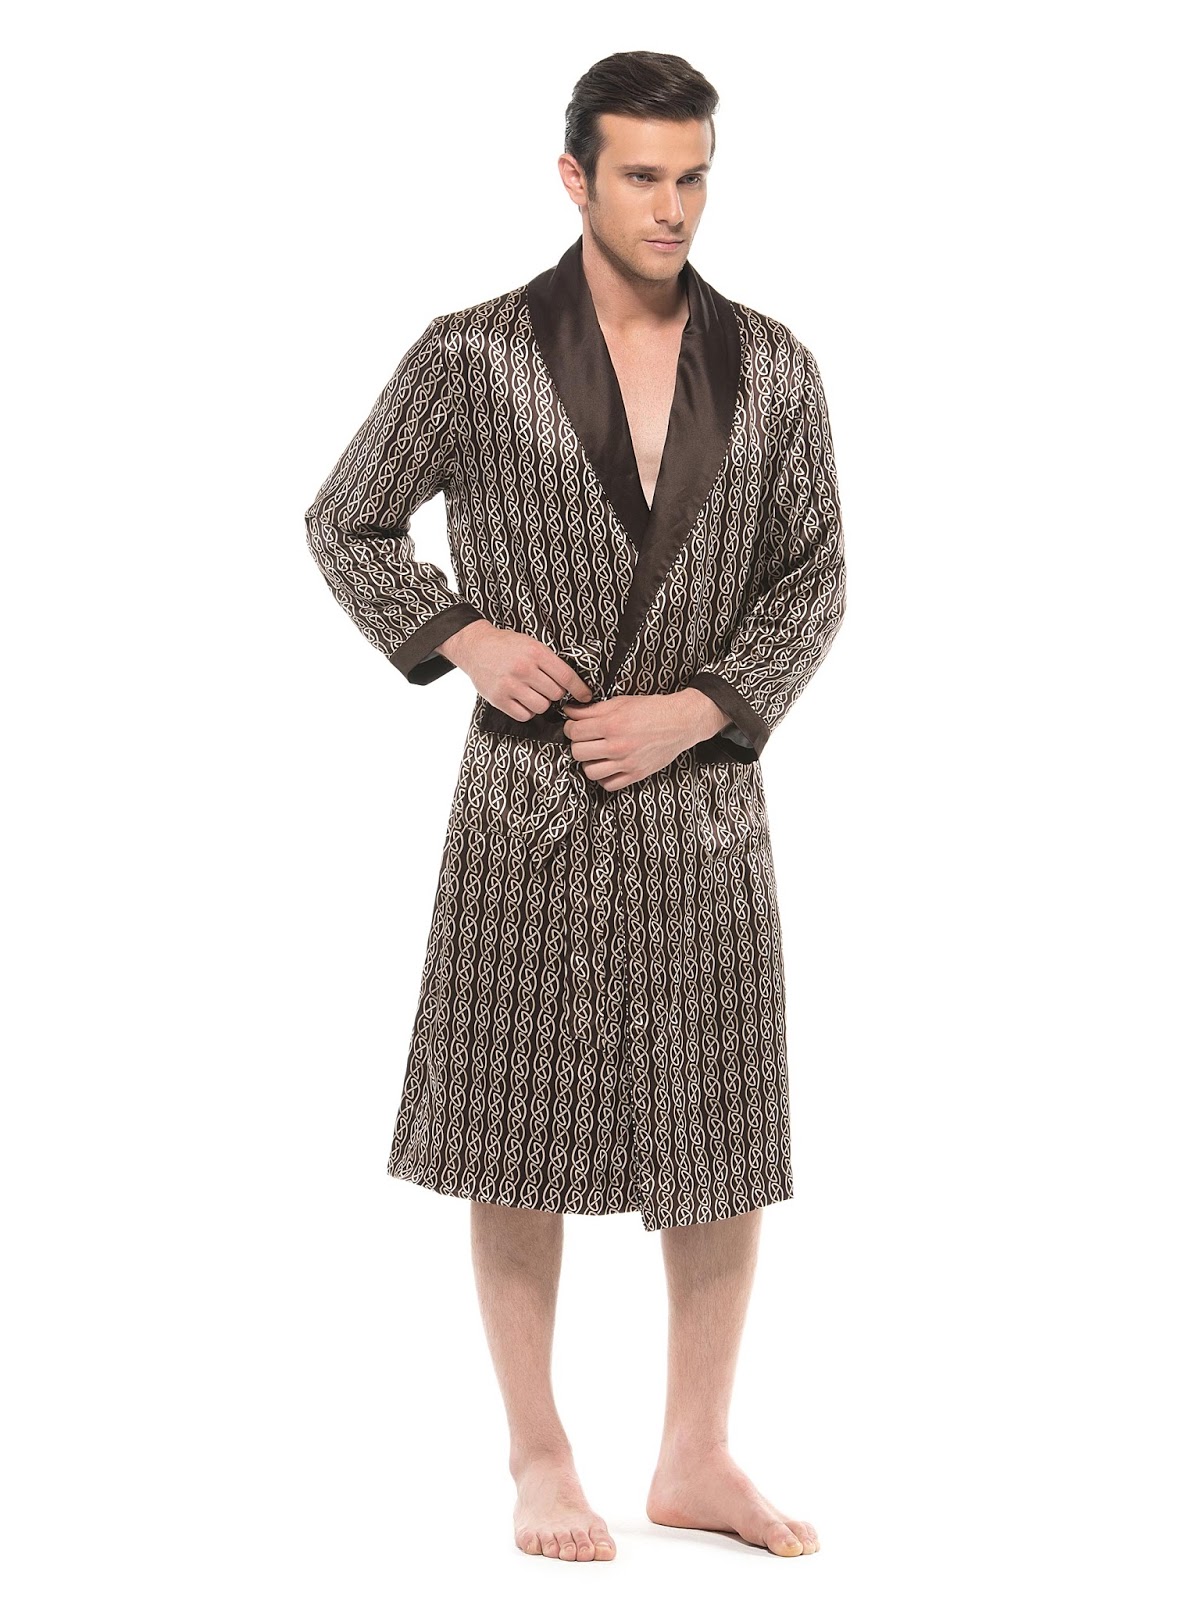 Silk Robes For Men - Candy Crow